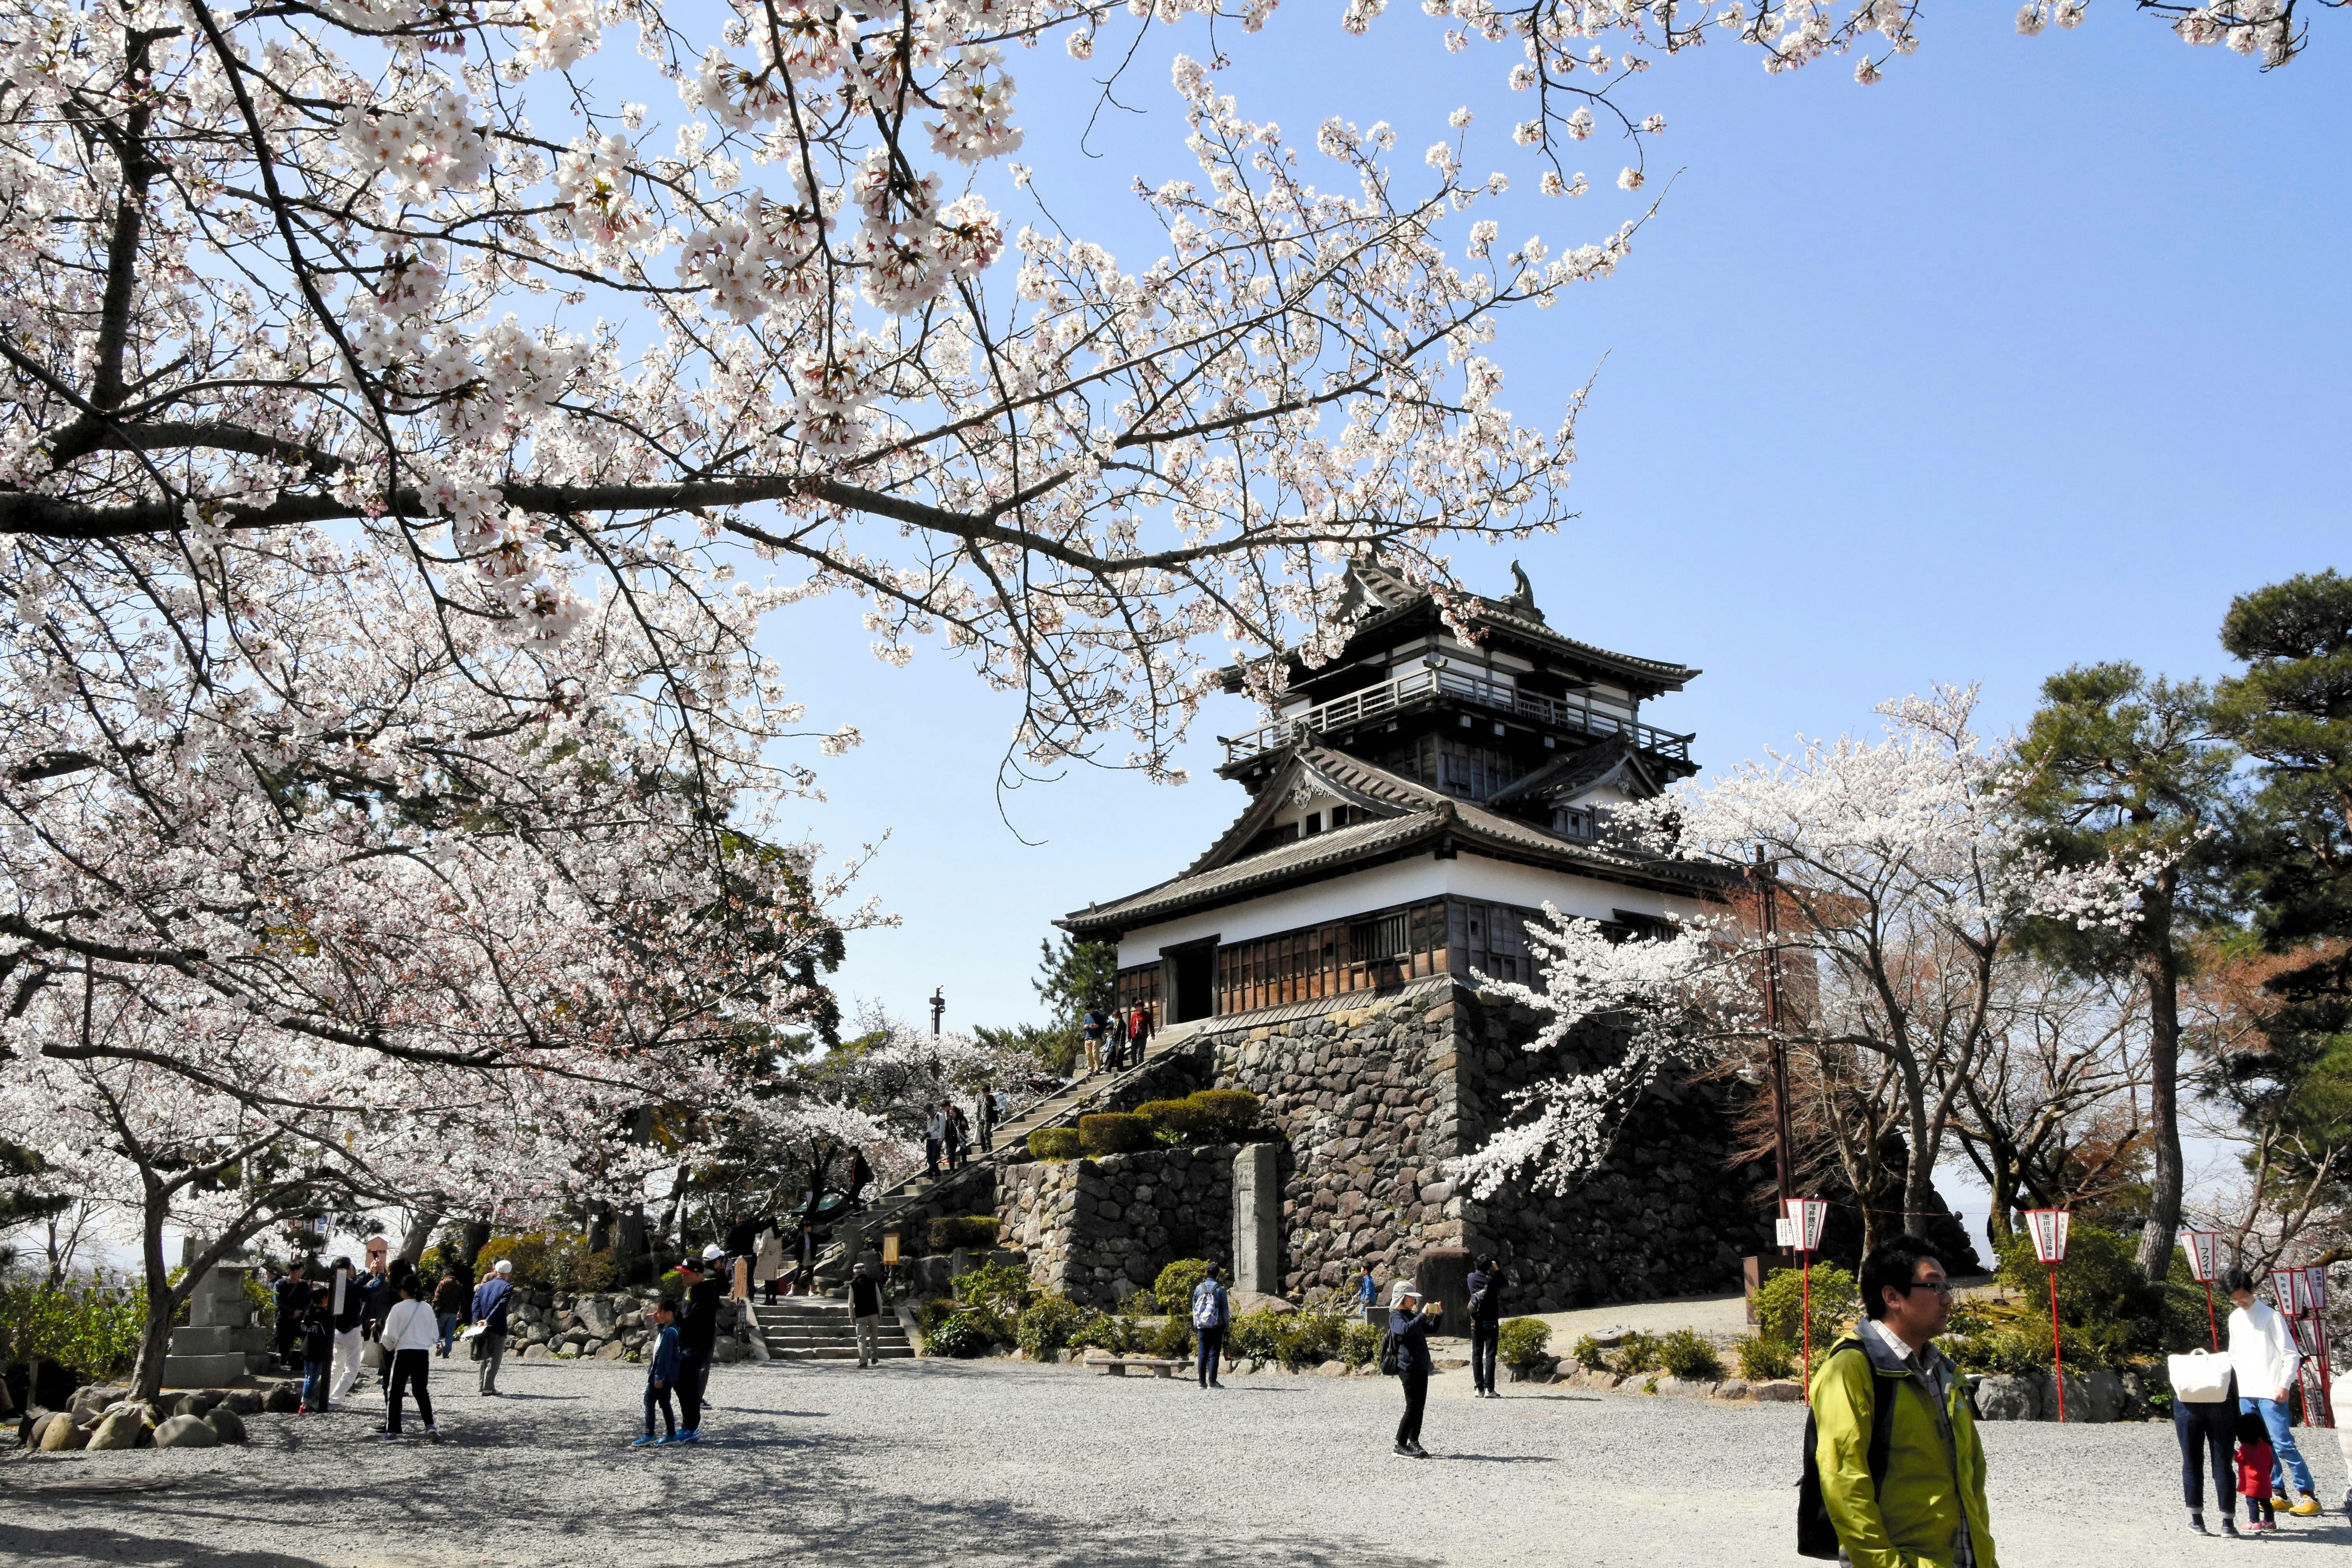 Maruoka Castle: an old wood and stone castle built in traditional Japanese style, with a sloping roof. In the foreground trees with cherry blossoms are visible, as well as people walking towards the castle.